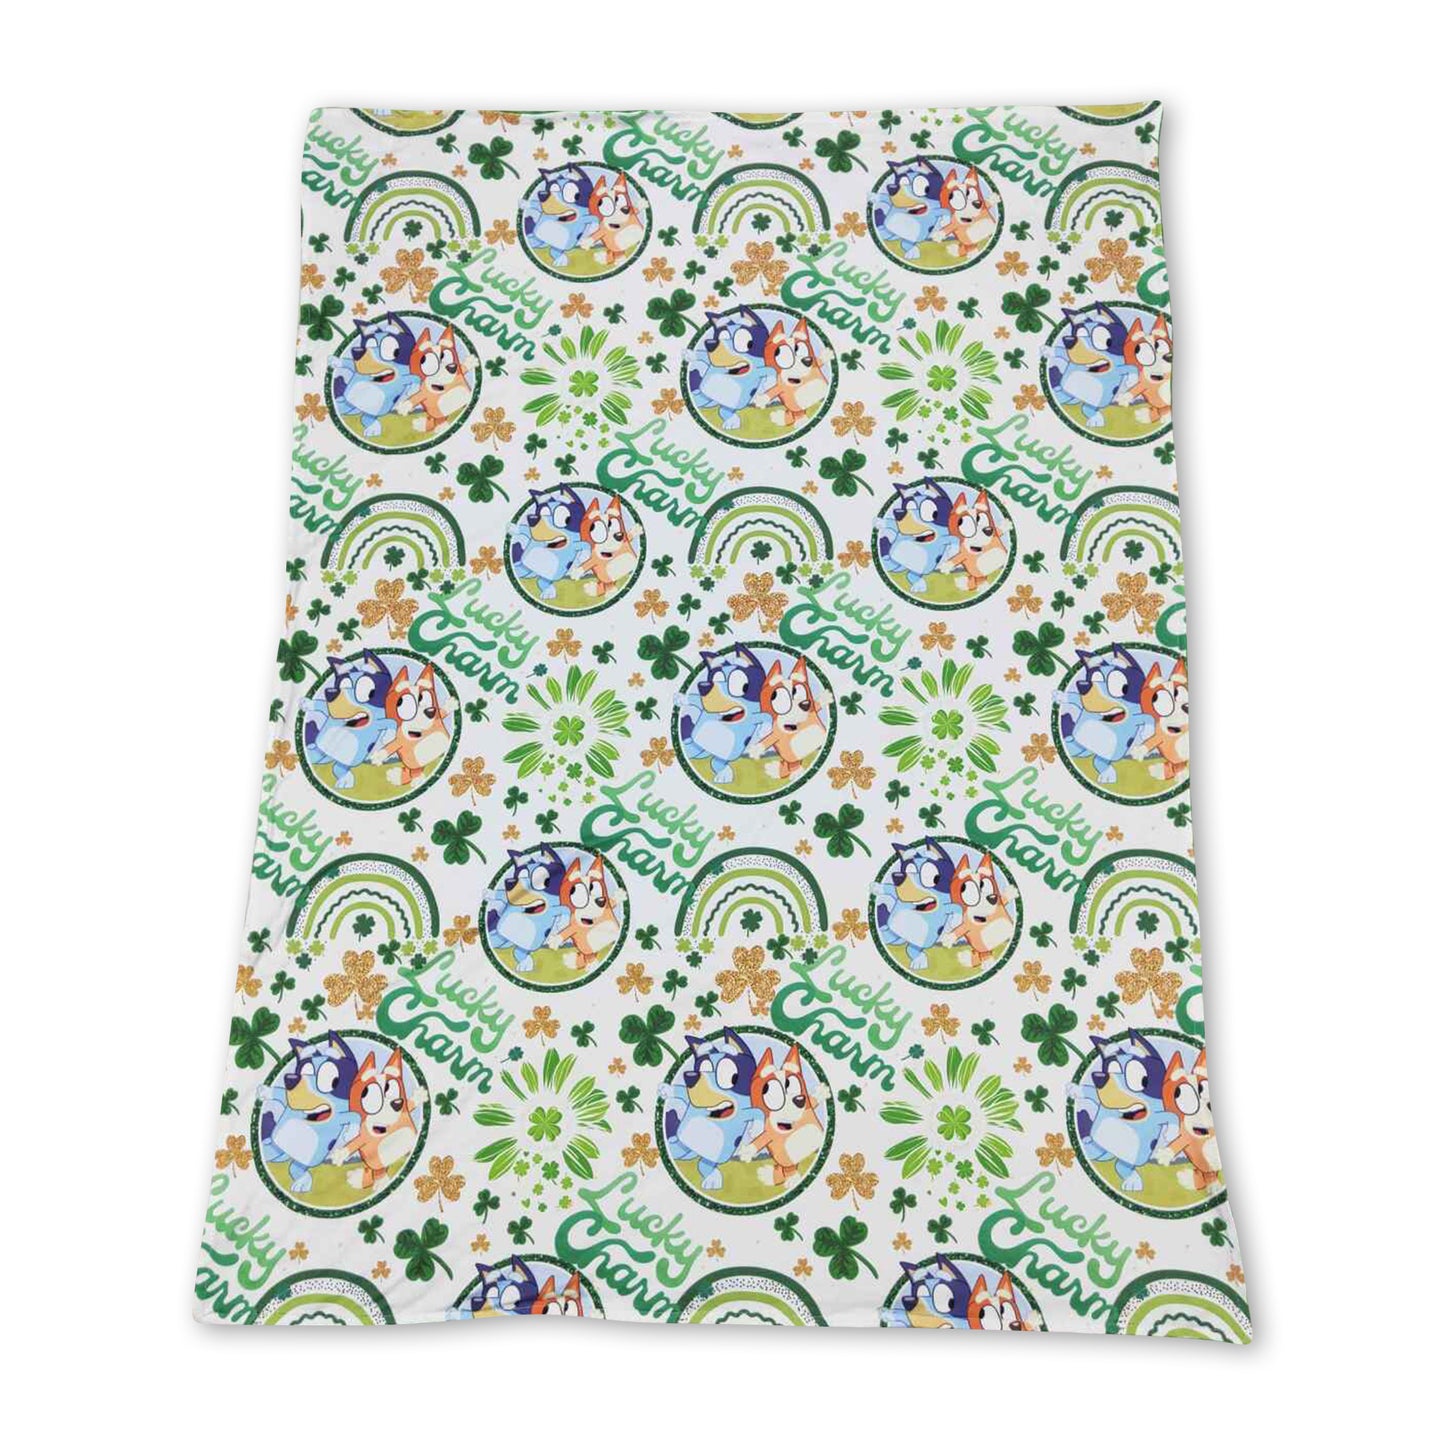 Green lucky charm clover dog baby st patrick's blanket